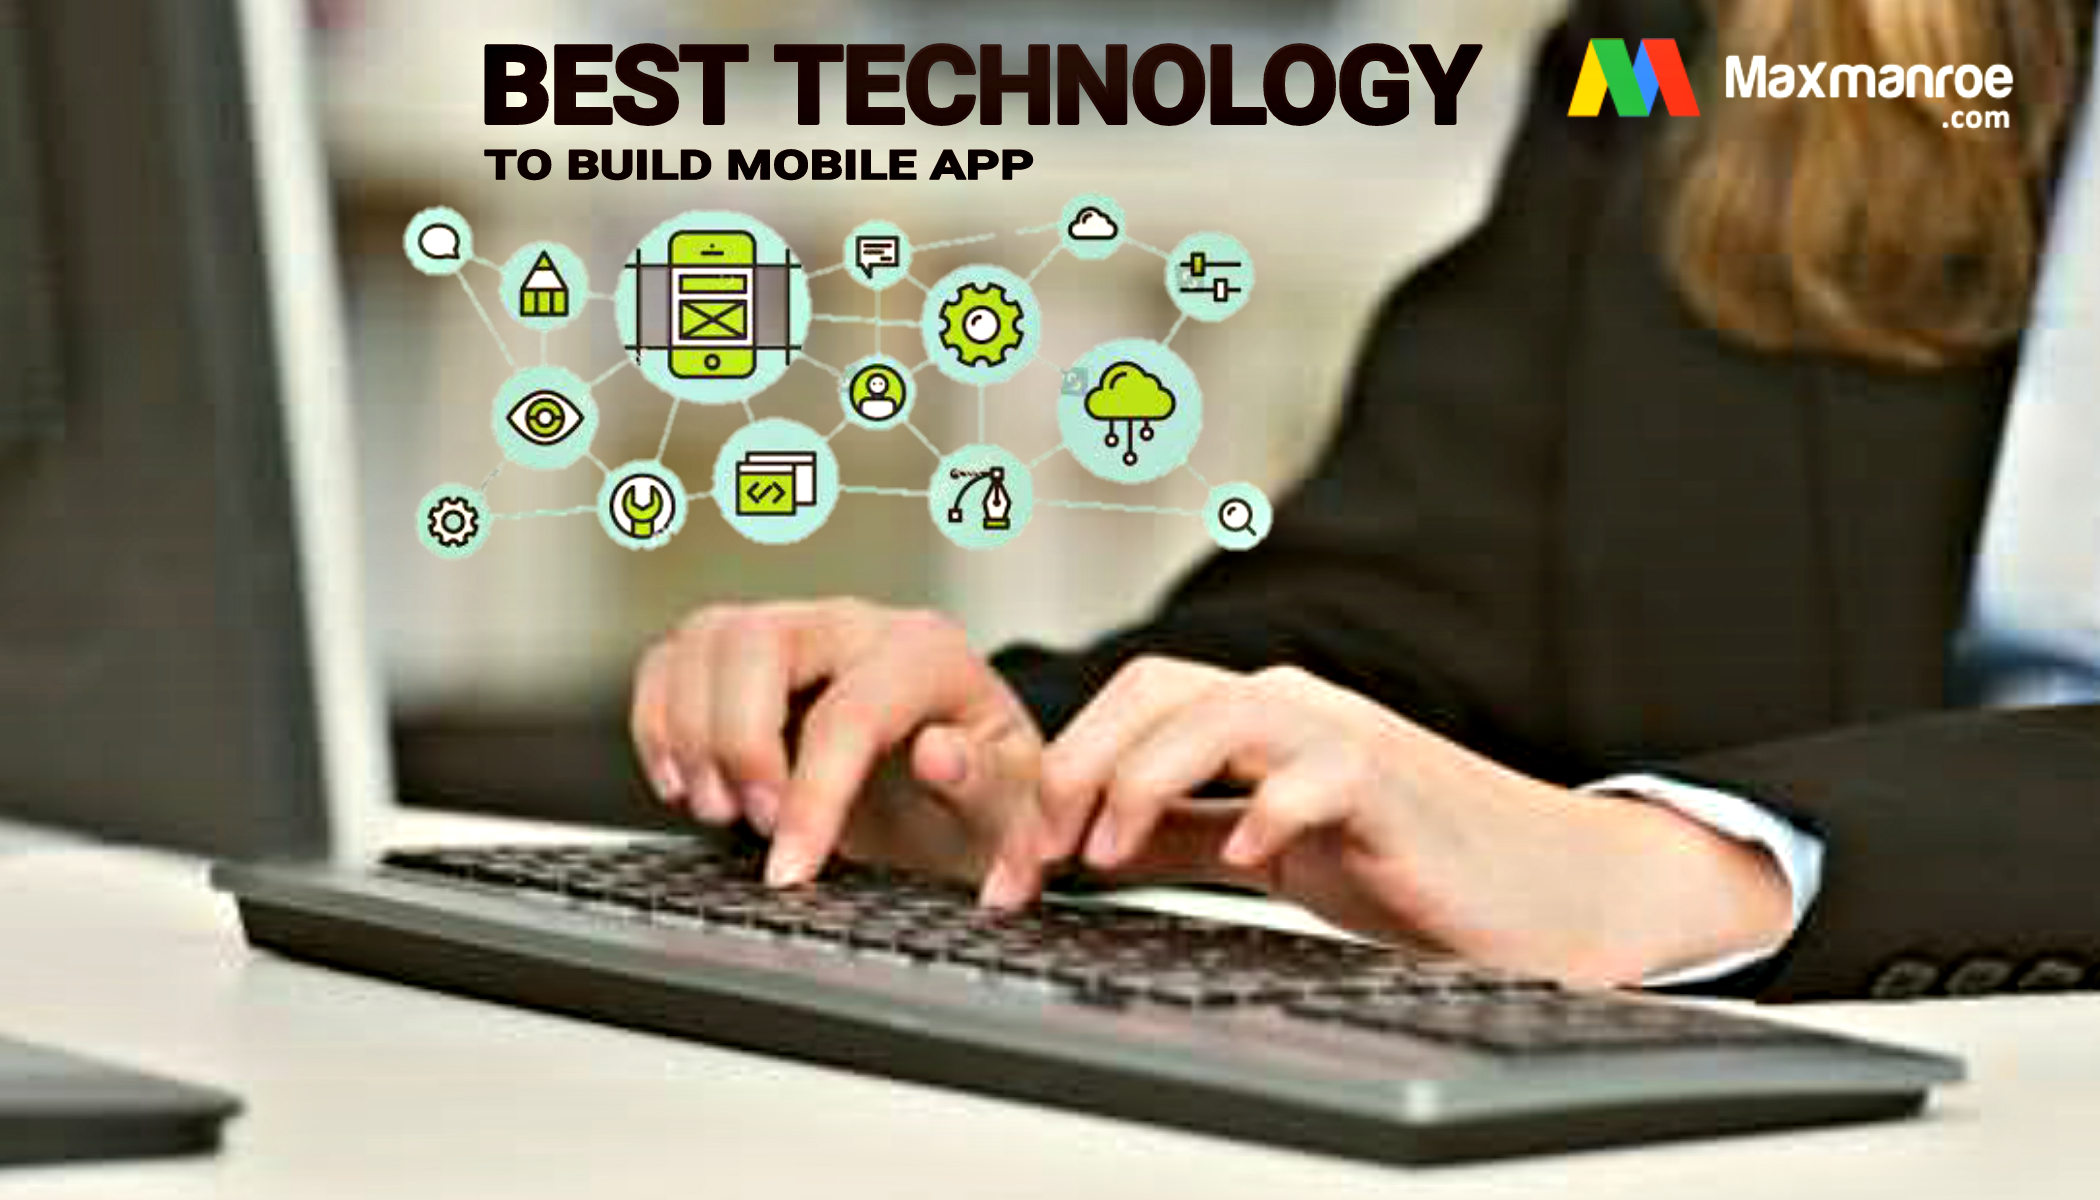 Best Technology To Build Mobile App